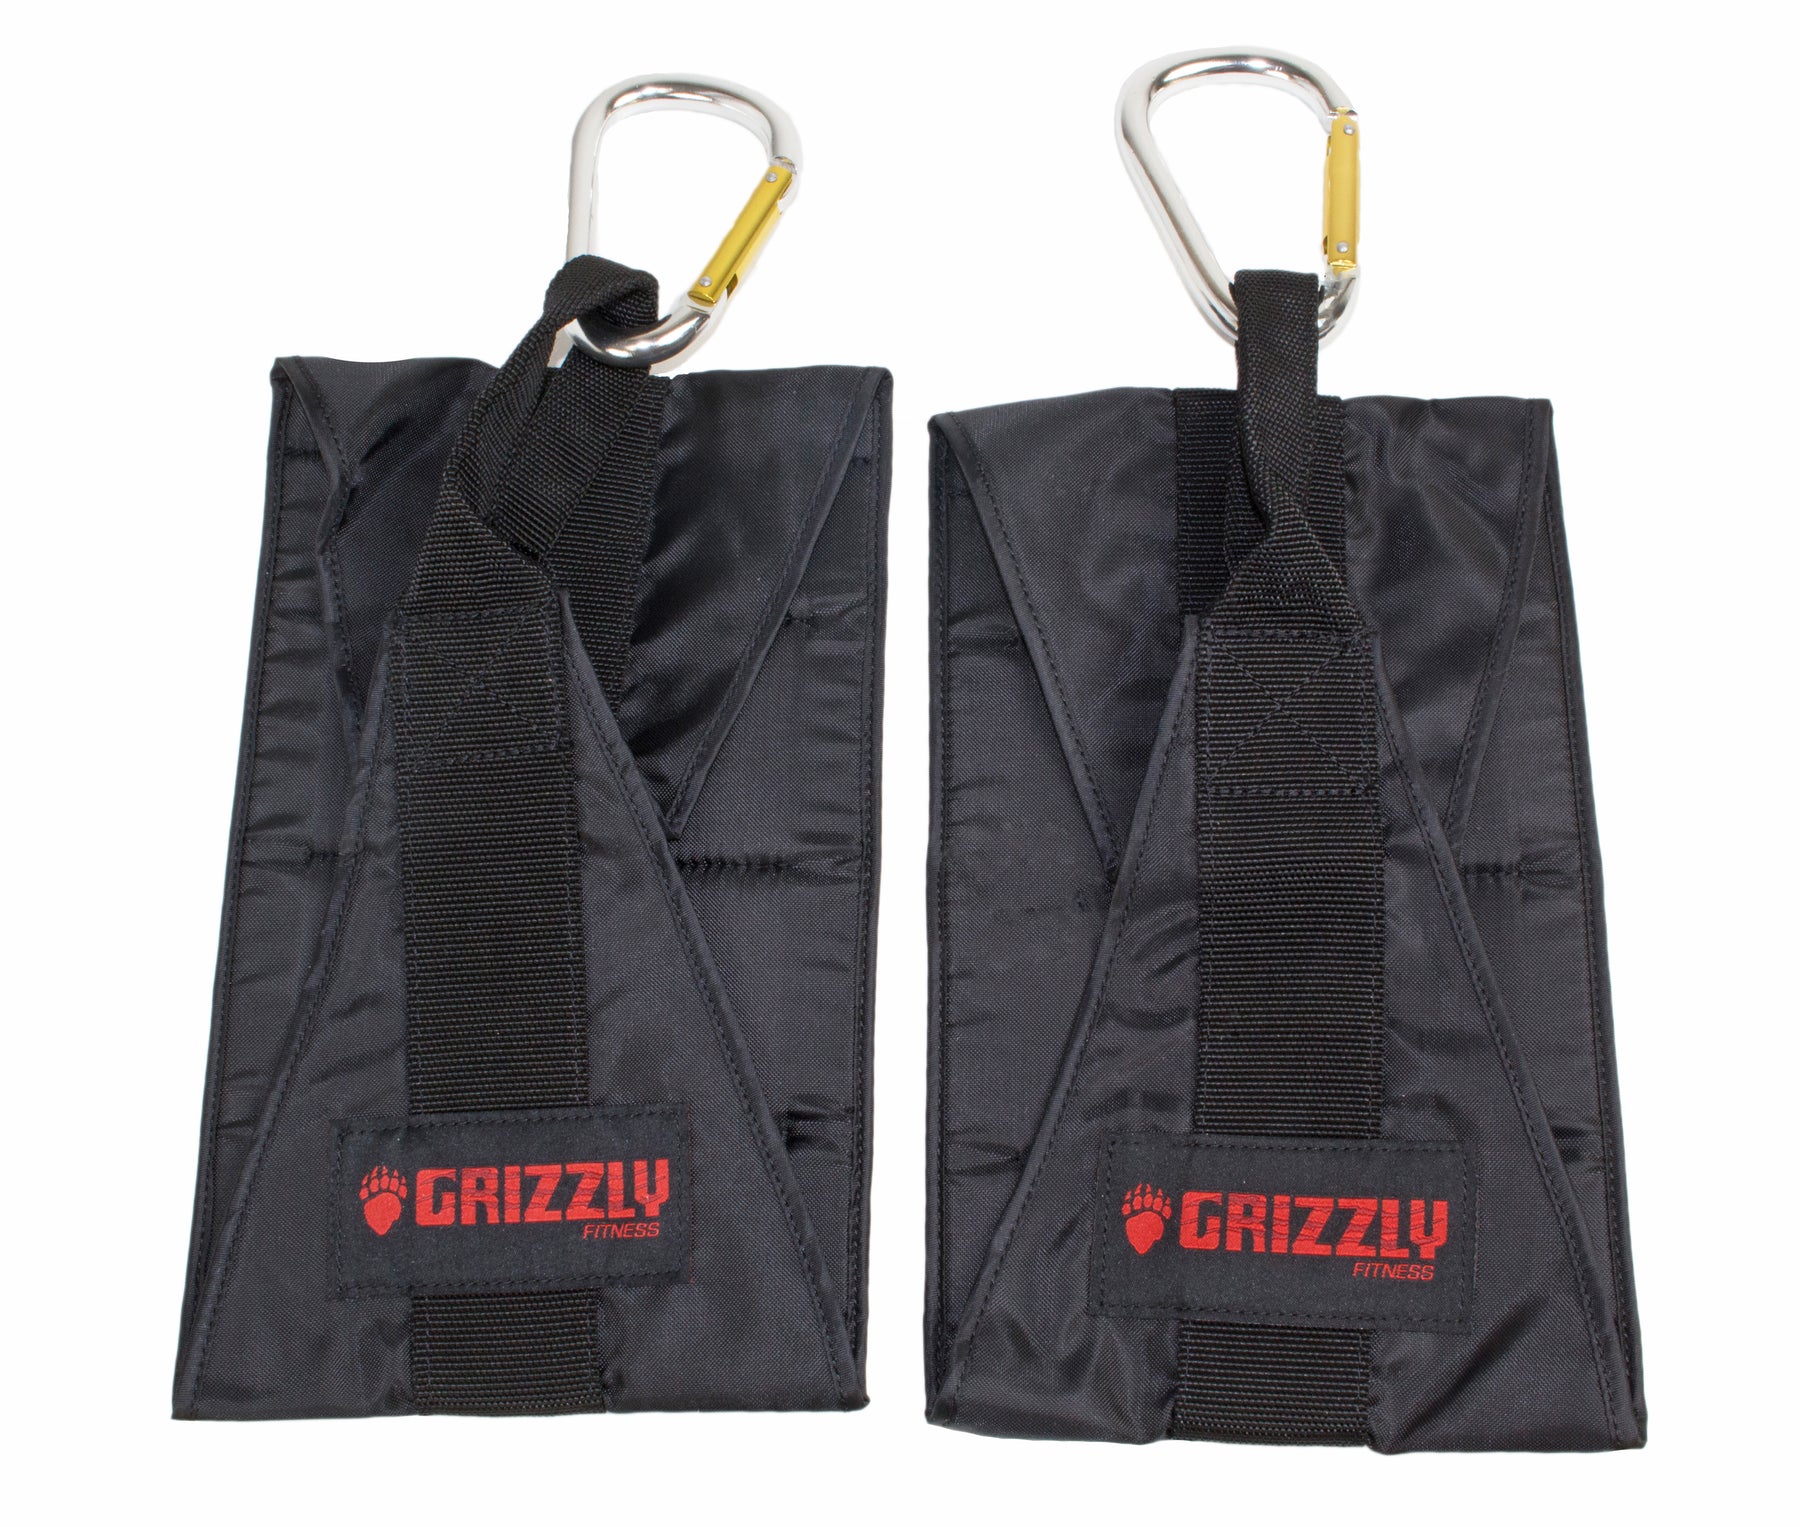 Grizzly Fitness Deluxe Hanging Ab Straps